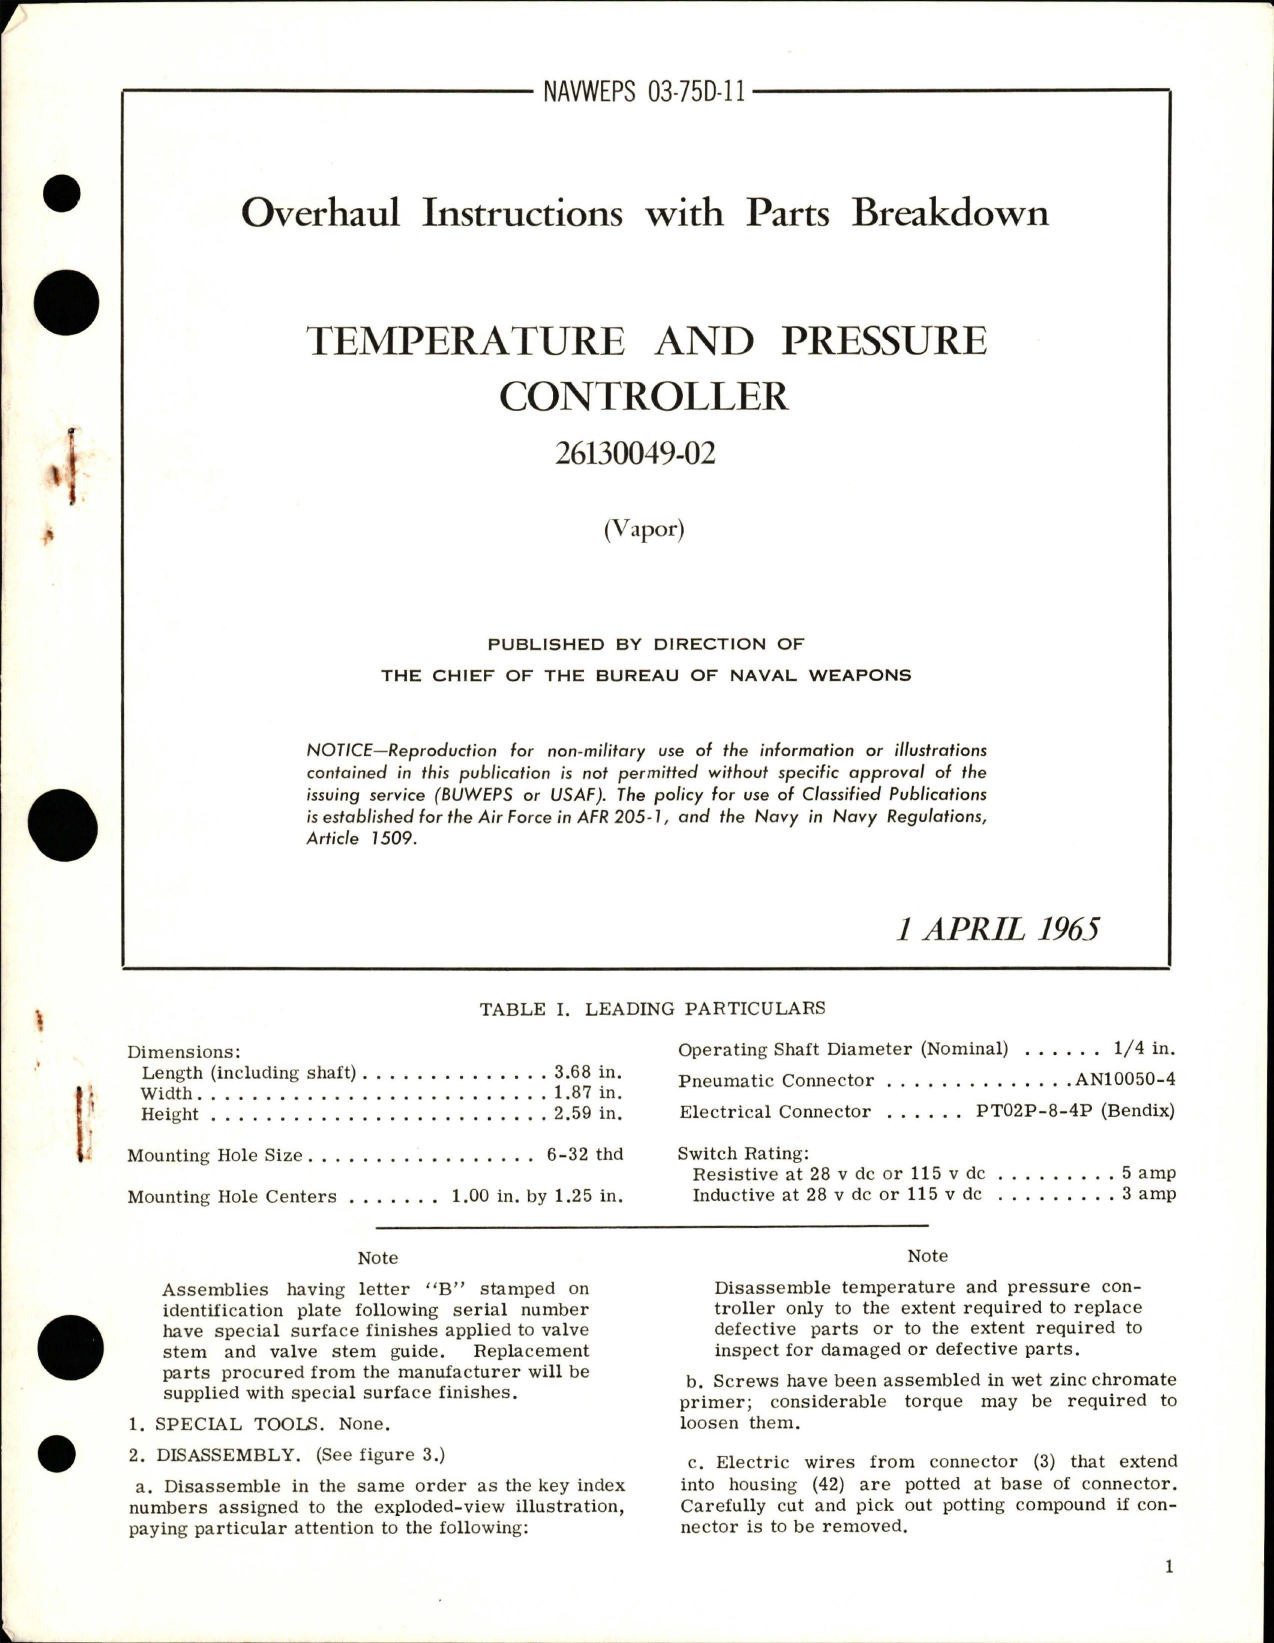 Sample page 1 from AirCorps Library document: Overhaul Instructions with Parts Breakdown for Temperature and Pressure Controller - 26130049-02